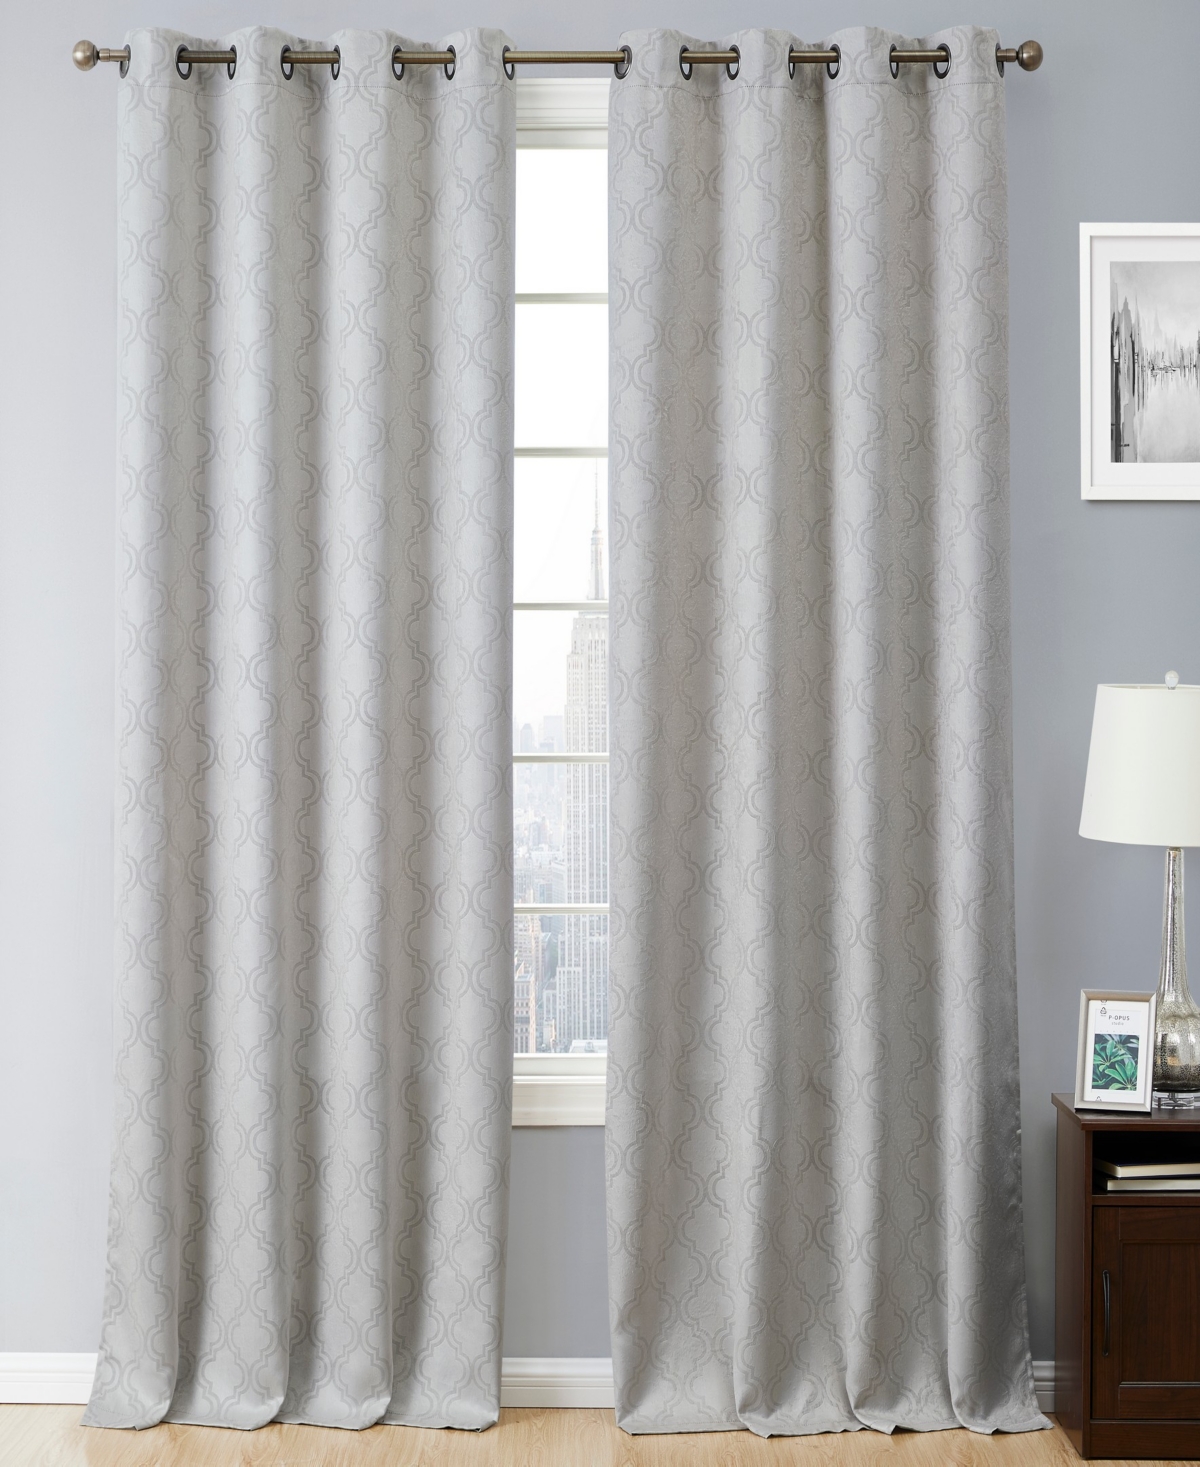 Redmont Lattice Pattern Thick Soft Thermal Insulated Energy Efficient Room Darkening Privacy Blackout Grommet Curtain Panels for Living Room -